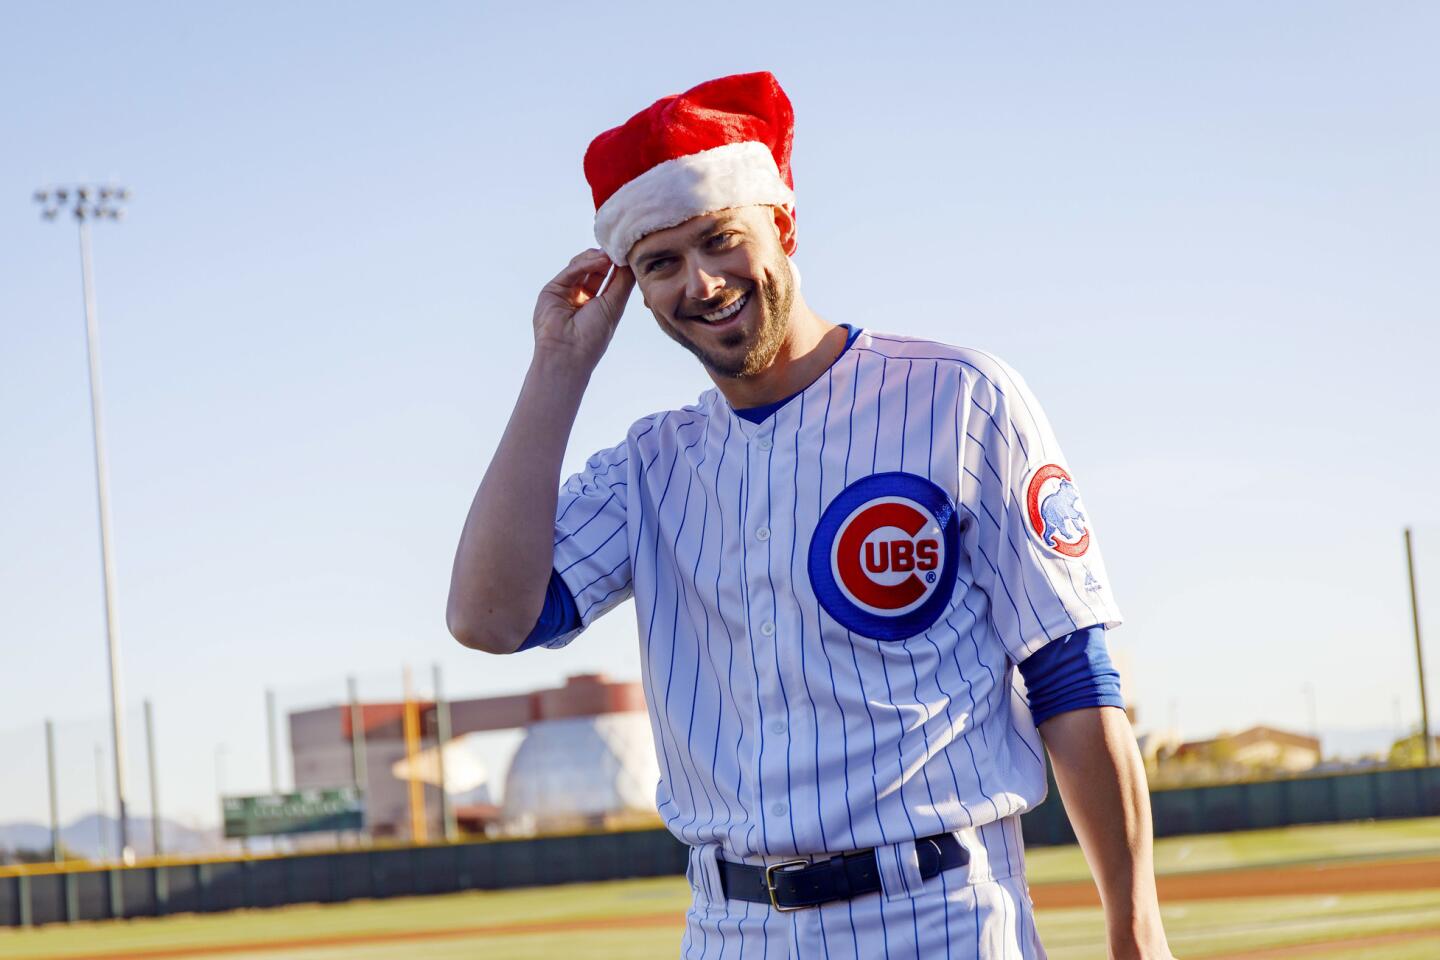 Timeline: Kris Bryant's career with the Chicago Cubs